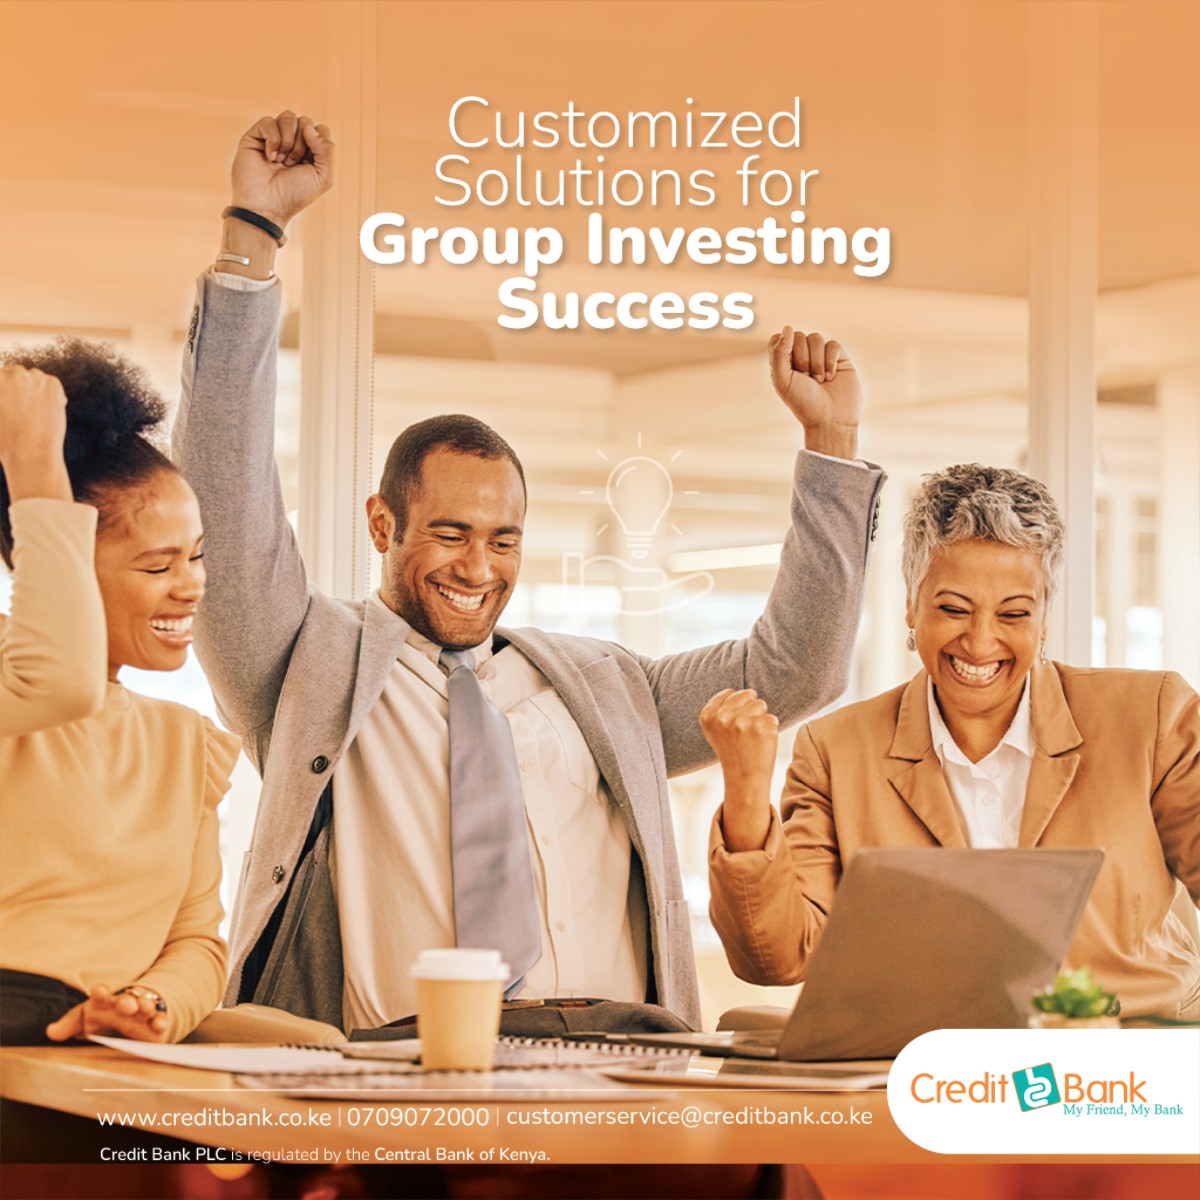 Every group is unique, and so are their investment needs. Explore our tailored solutions designed to help your group thrive in today's dynamic market.
#Financialwellness
#Yourfriendyourbank